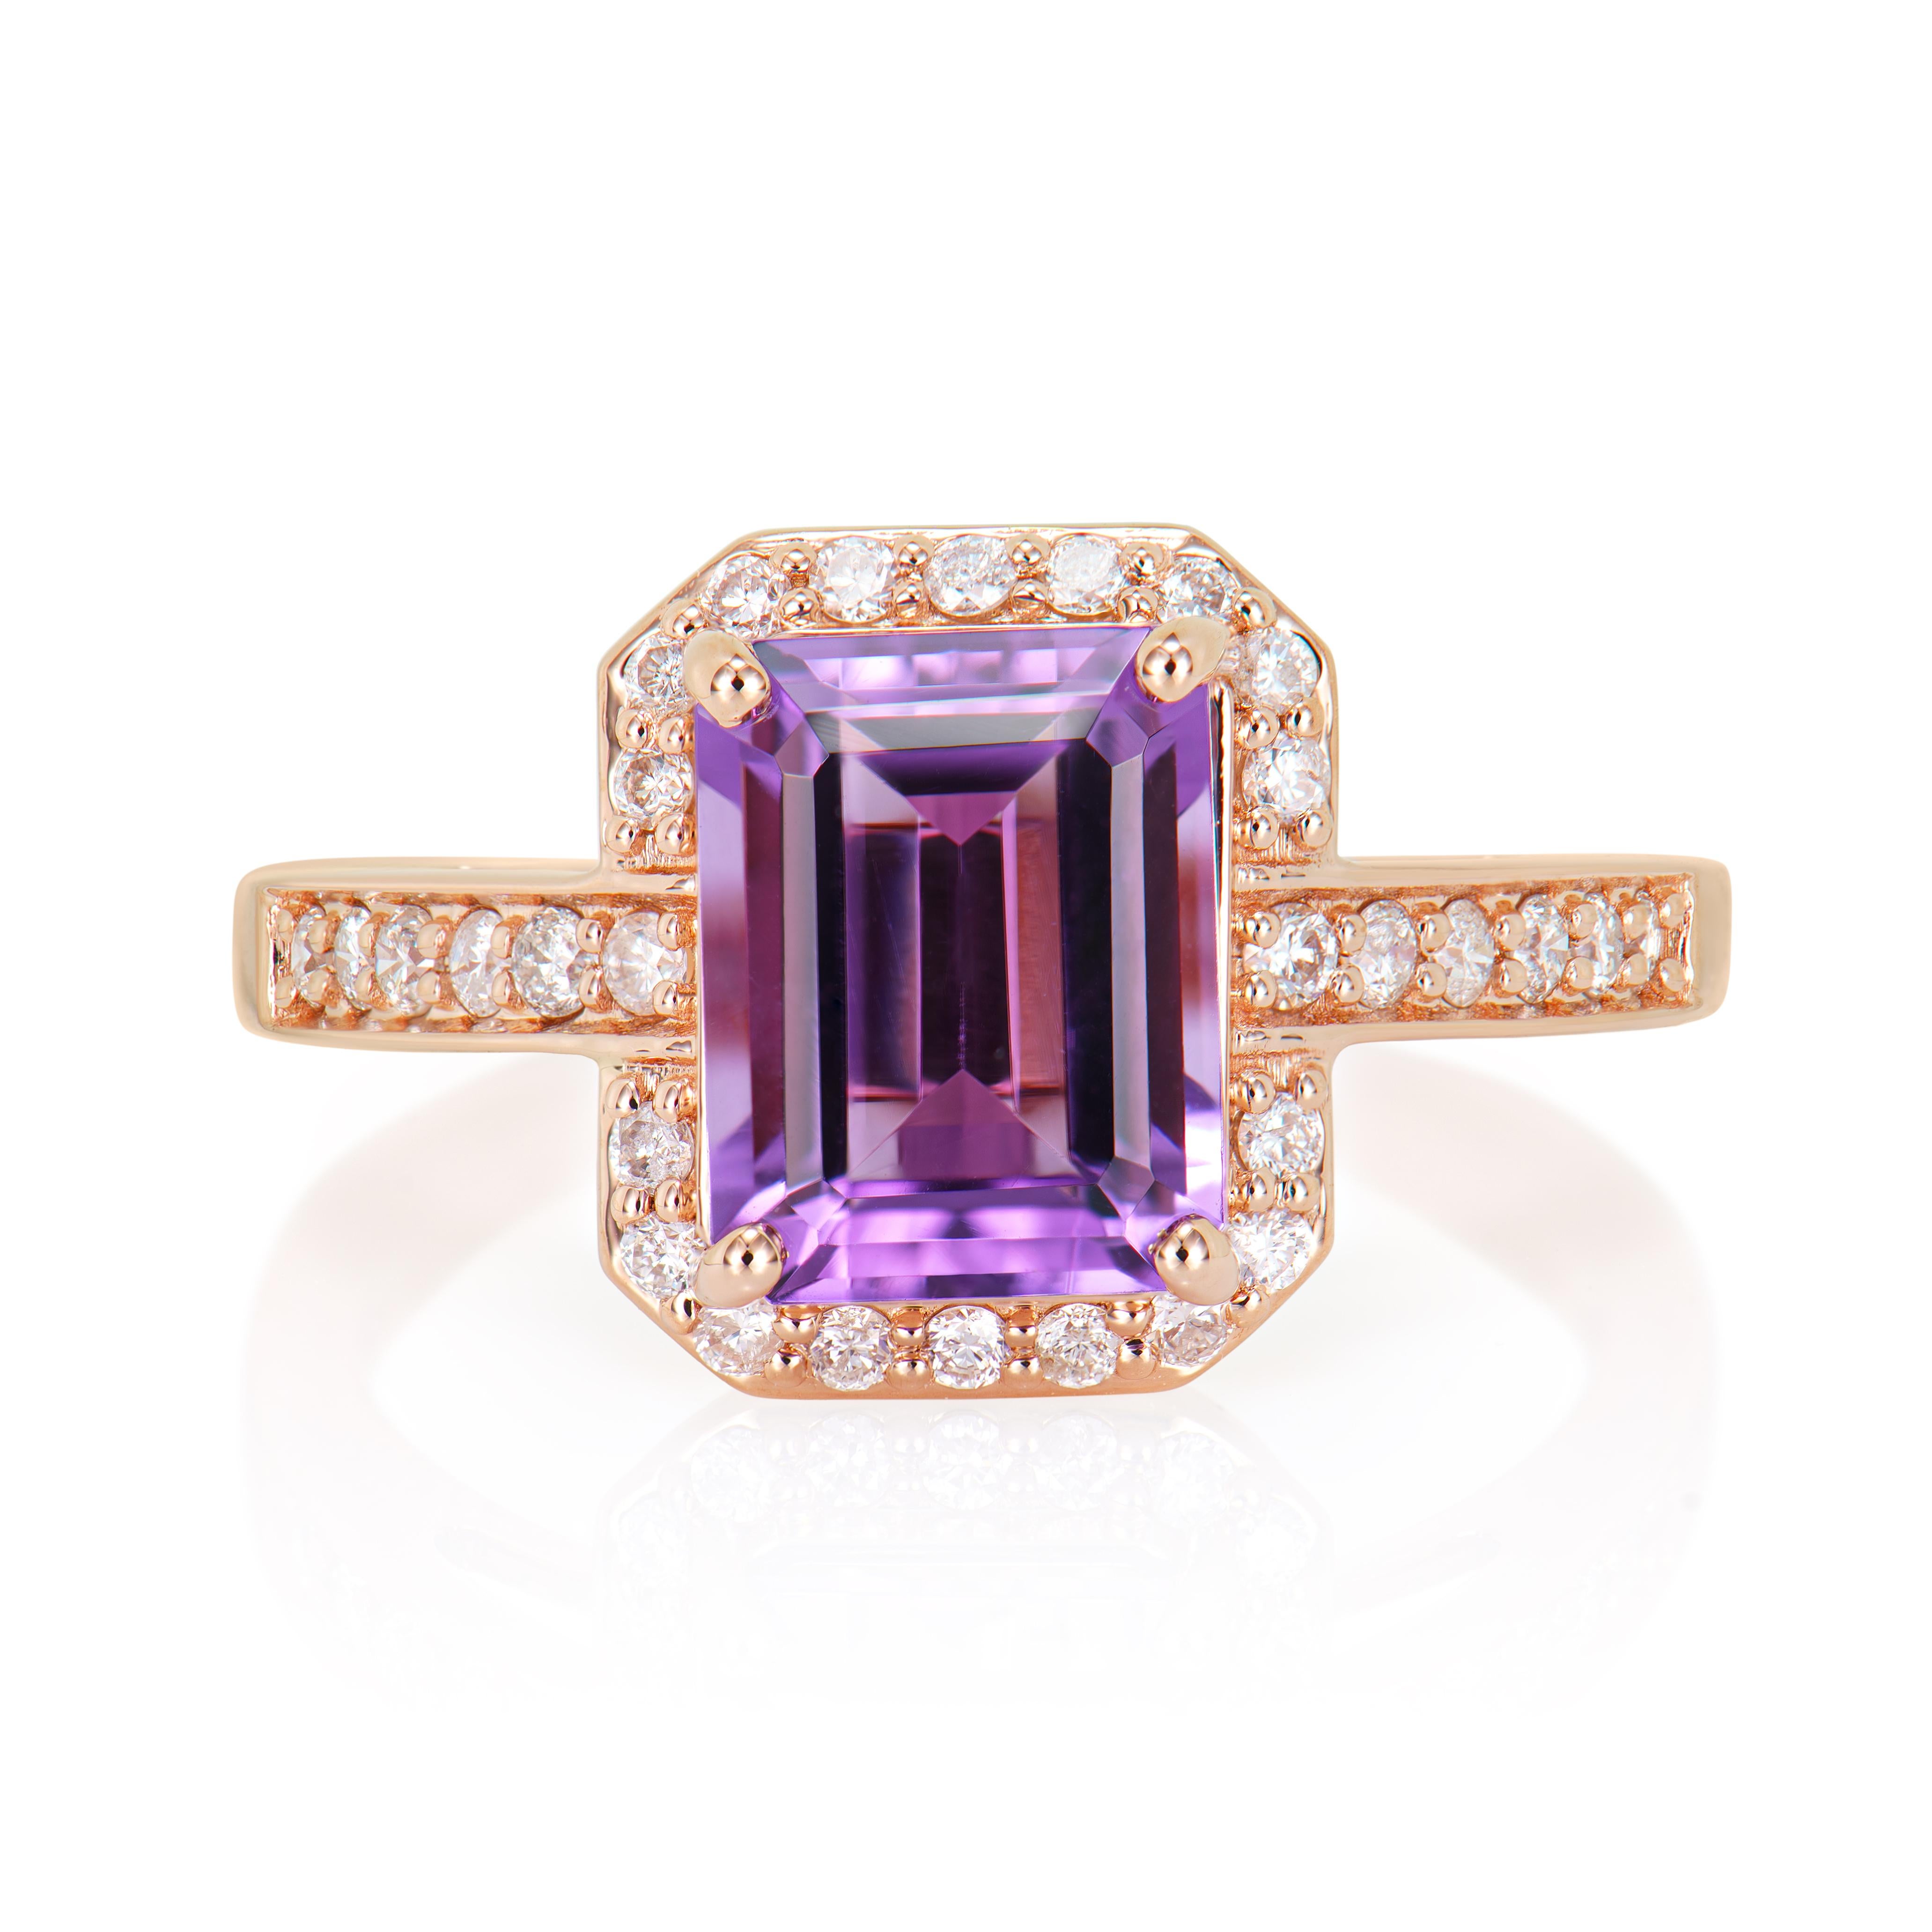 Contemporary 2.31 Carat Amethyst Fancy Ring in 14Karat Rose Gold with White Diamond.   For Sale